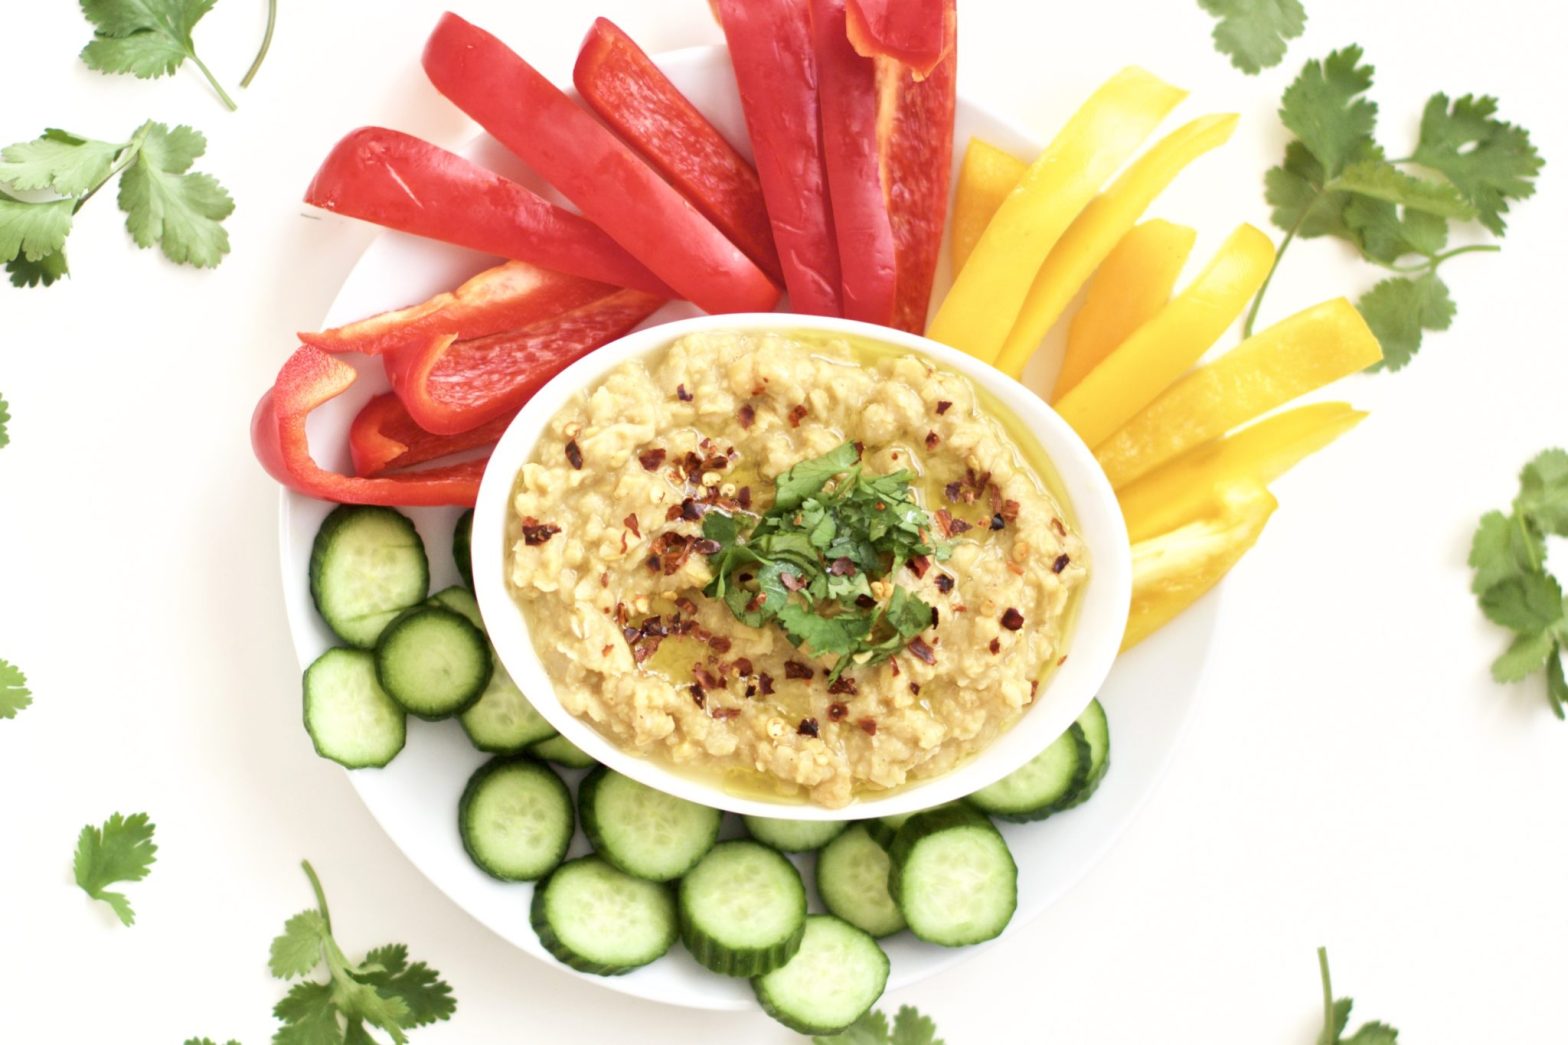 Different Ways to Make Hummus Without a Food Processor